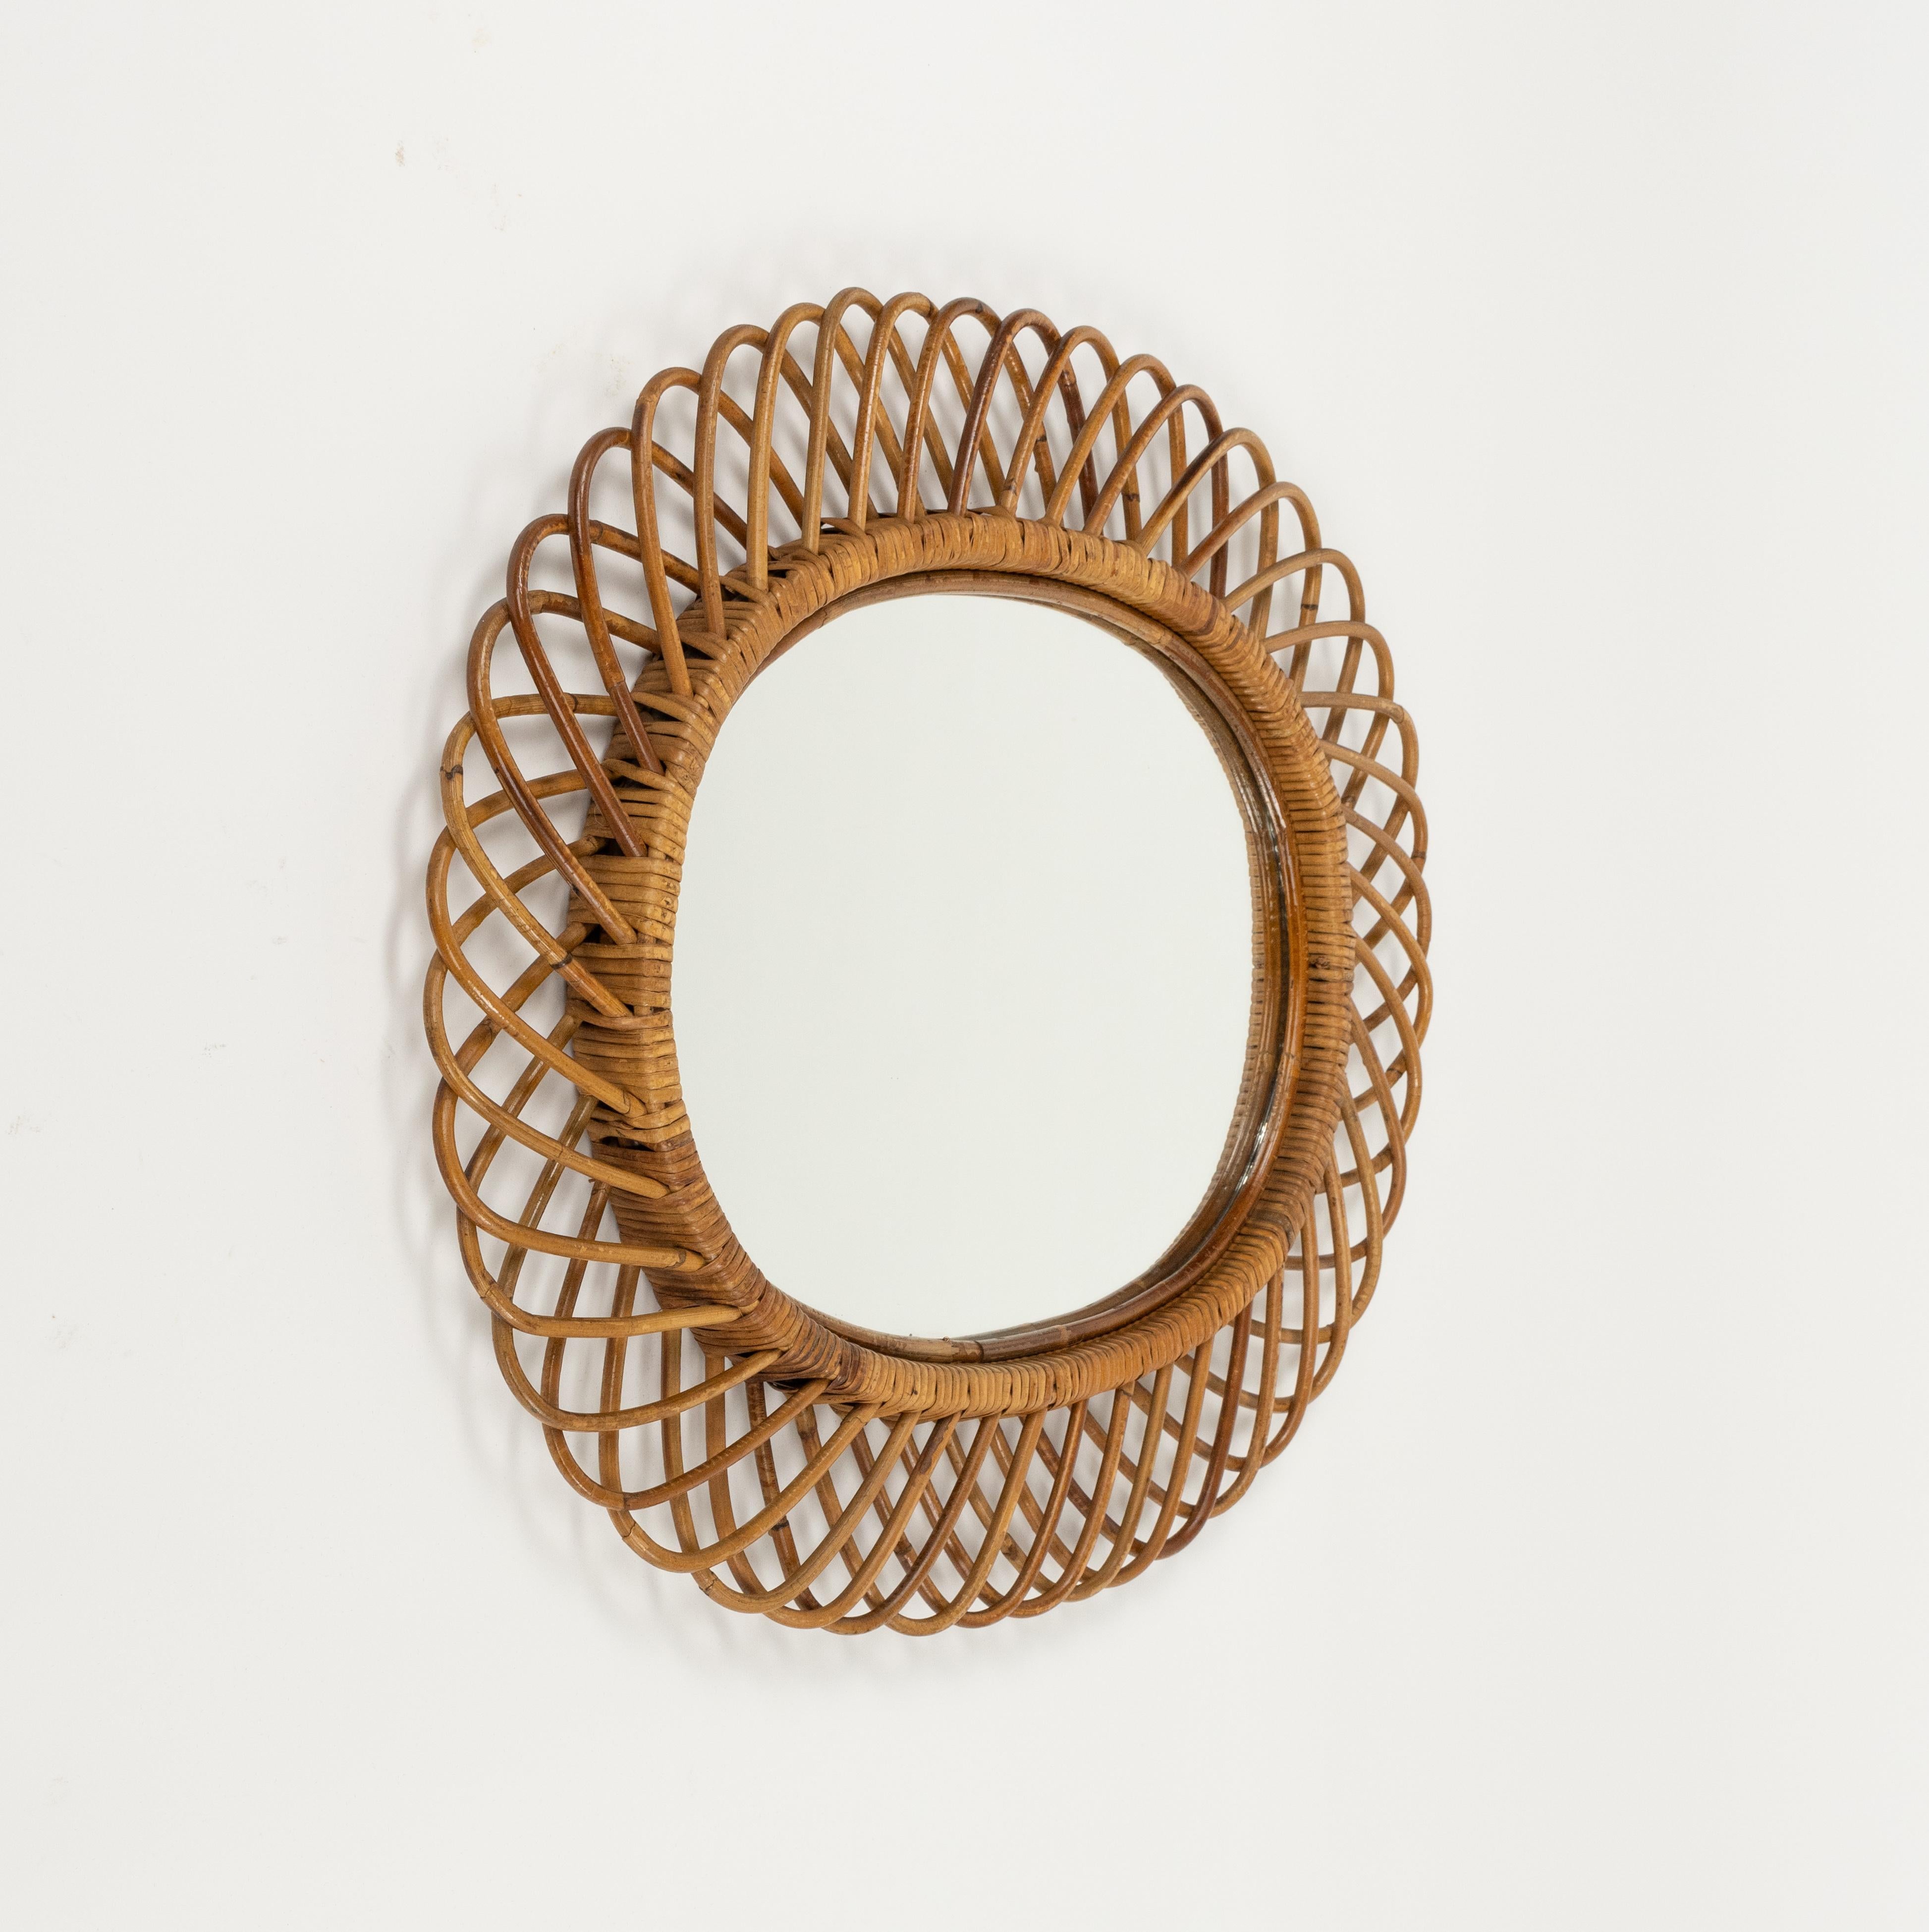 Midcentury beautiful oval wall mirror in bamboo and rattan by Franco Albini.   

Made in Italy in the 1960s.  

The mirror, original of the period, shows small signs of time.  

The mirror would be perfect for a bedroom, dressing room, cloakroom or